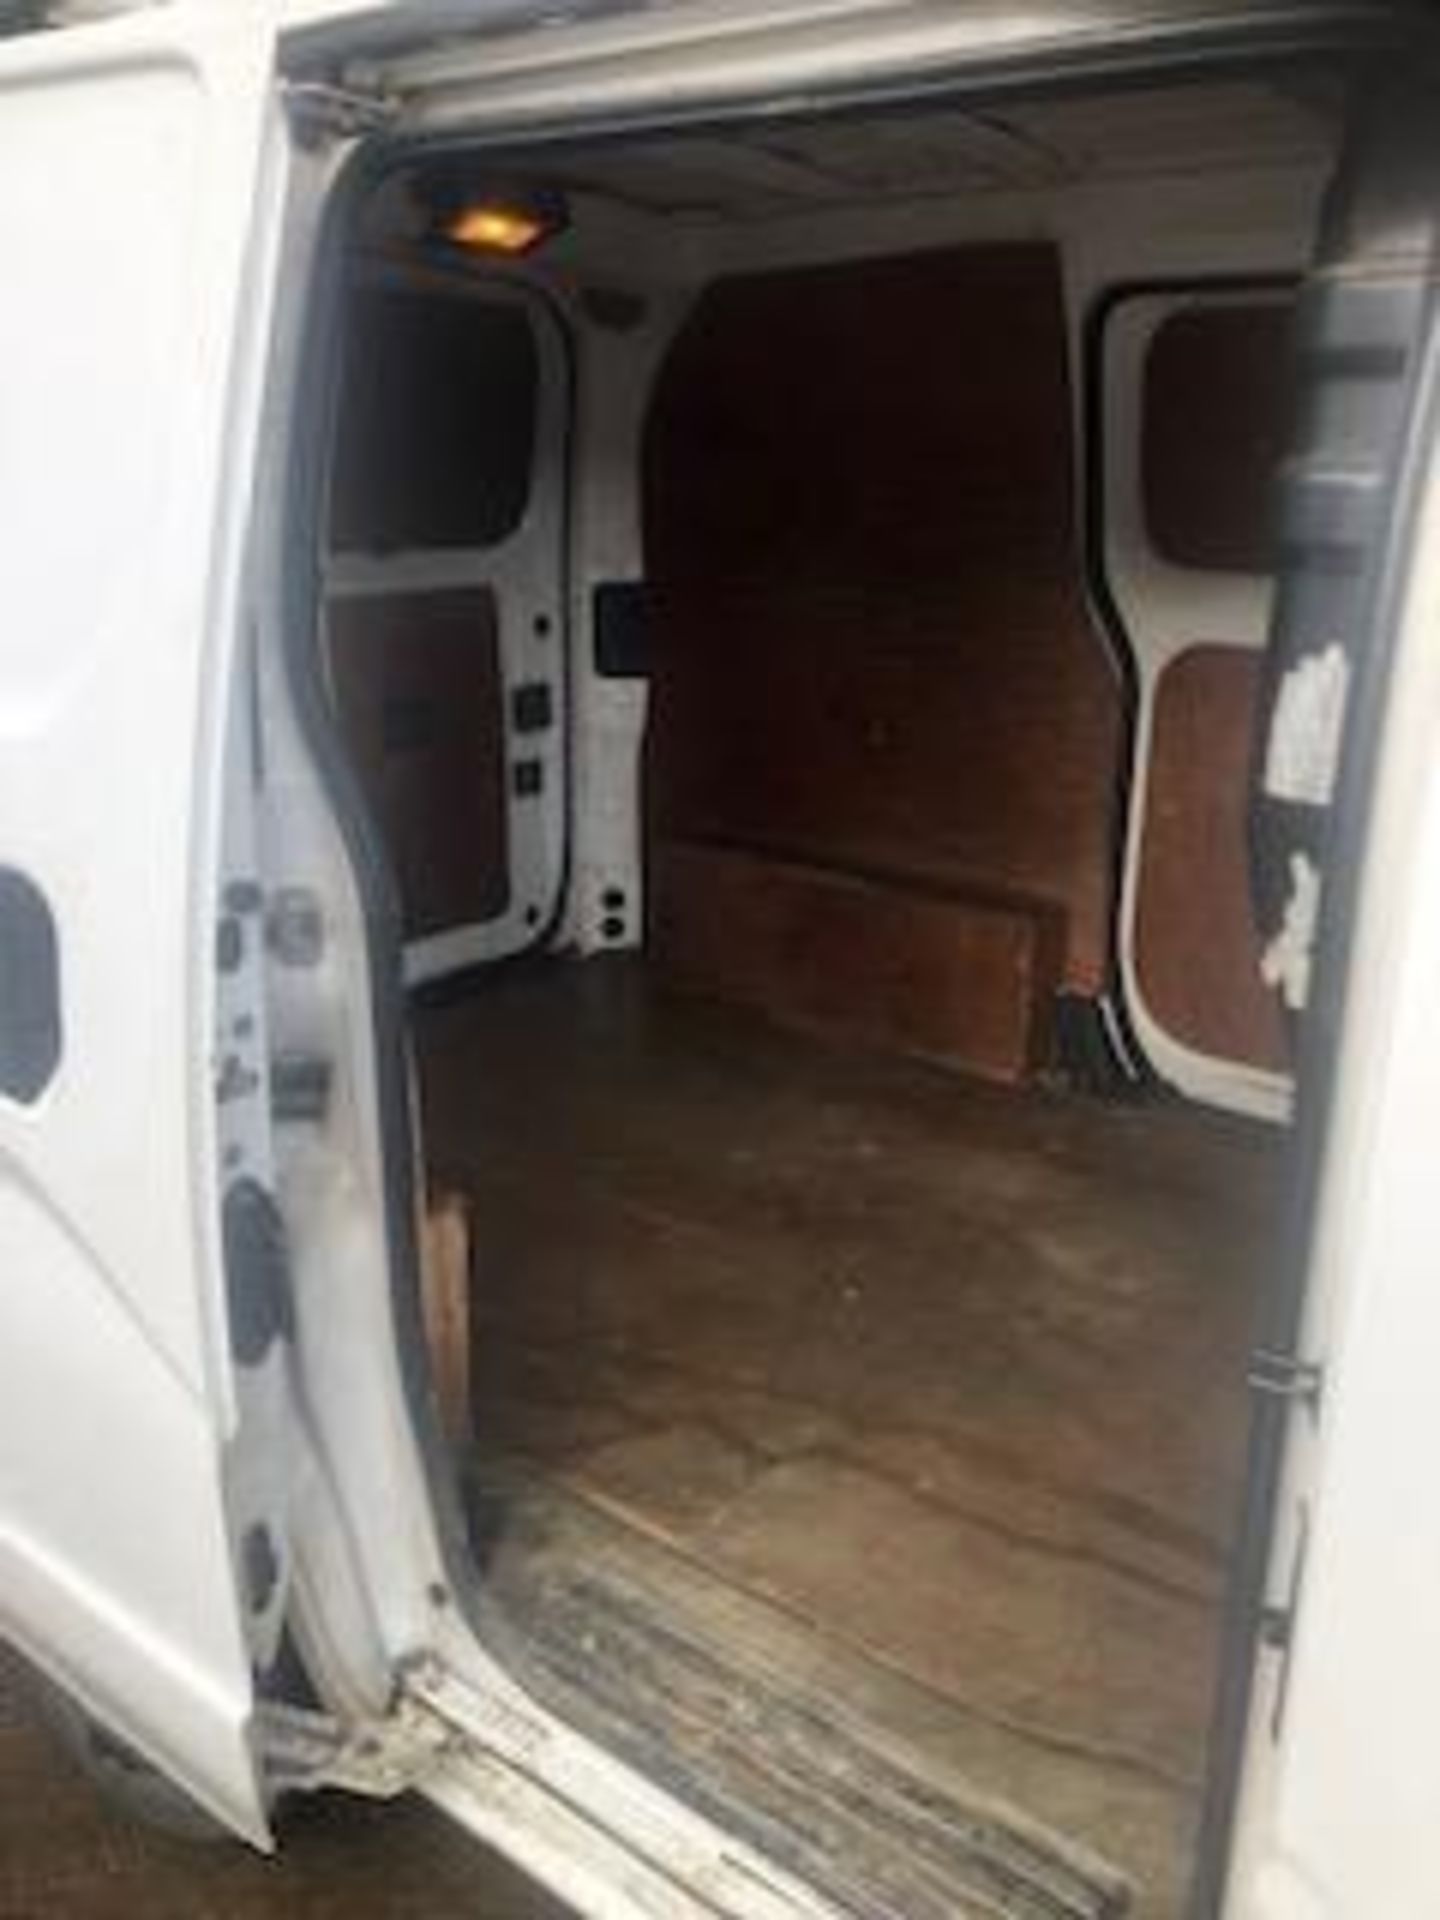 Nissan Nv200, 1.5 Dci - Image 5 of 8